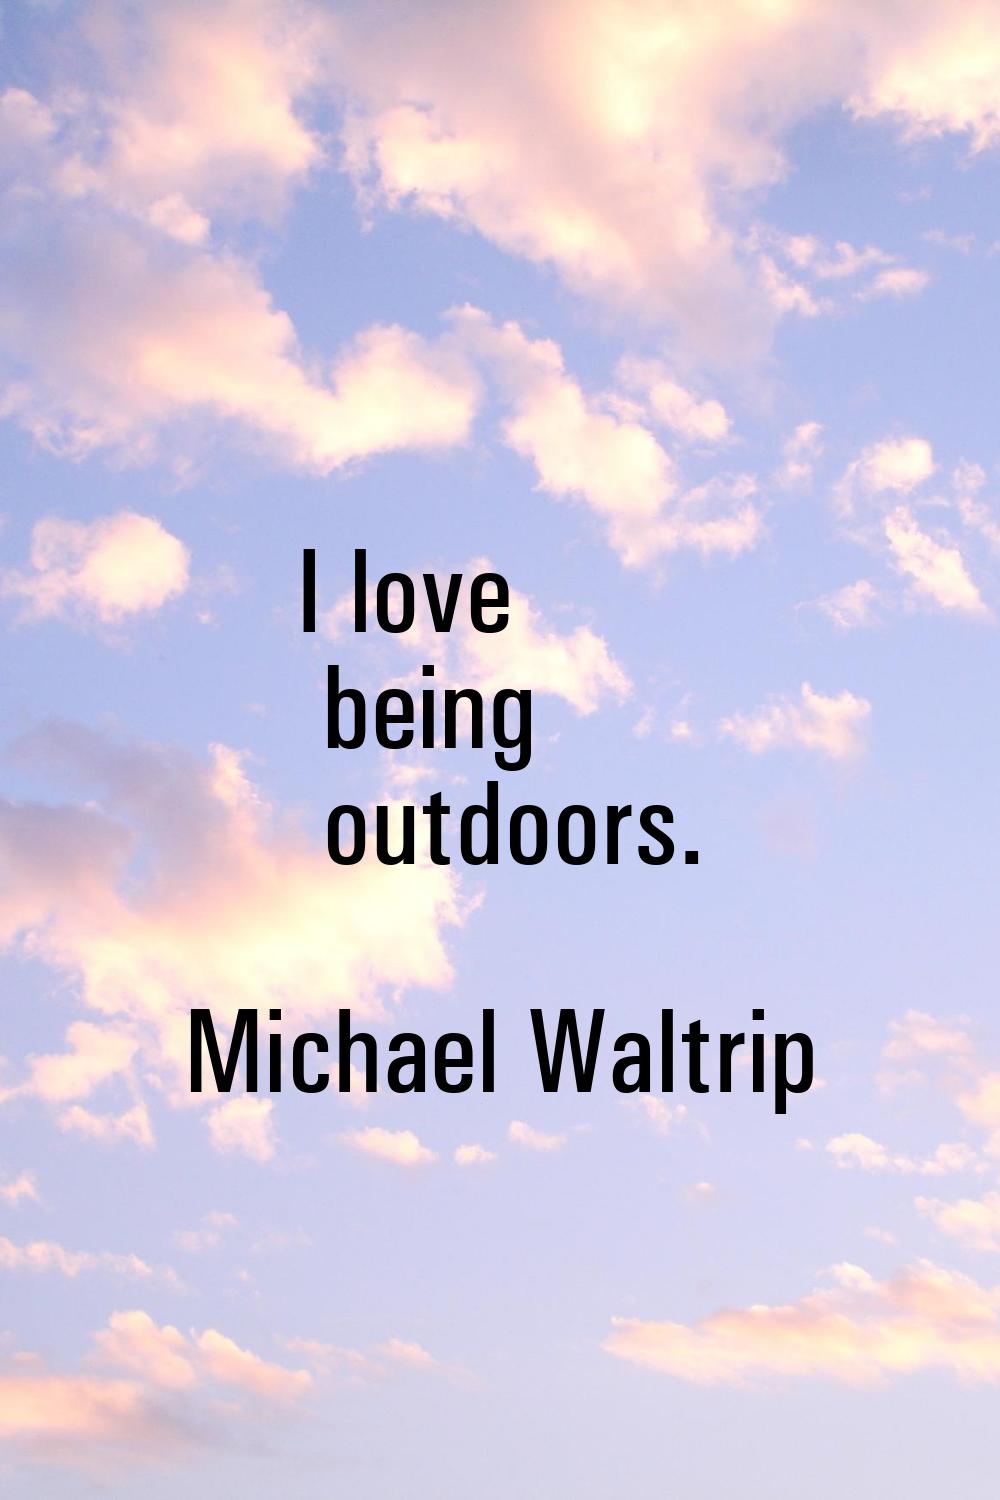 I love being outdoors.